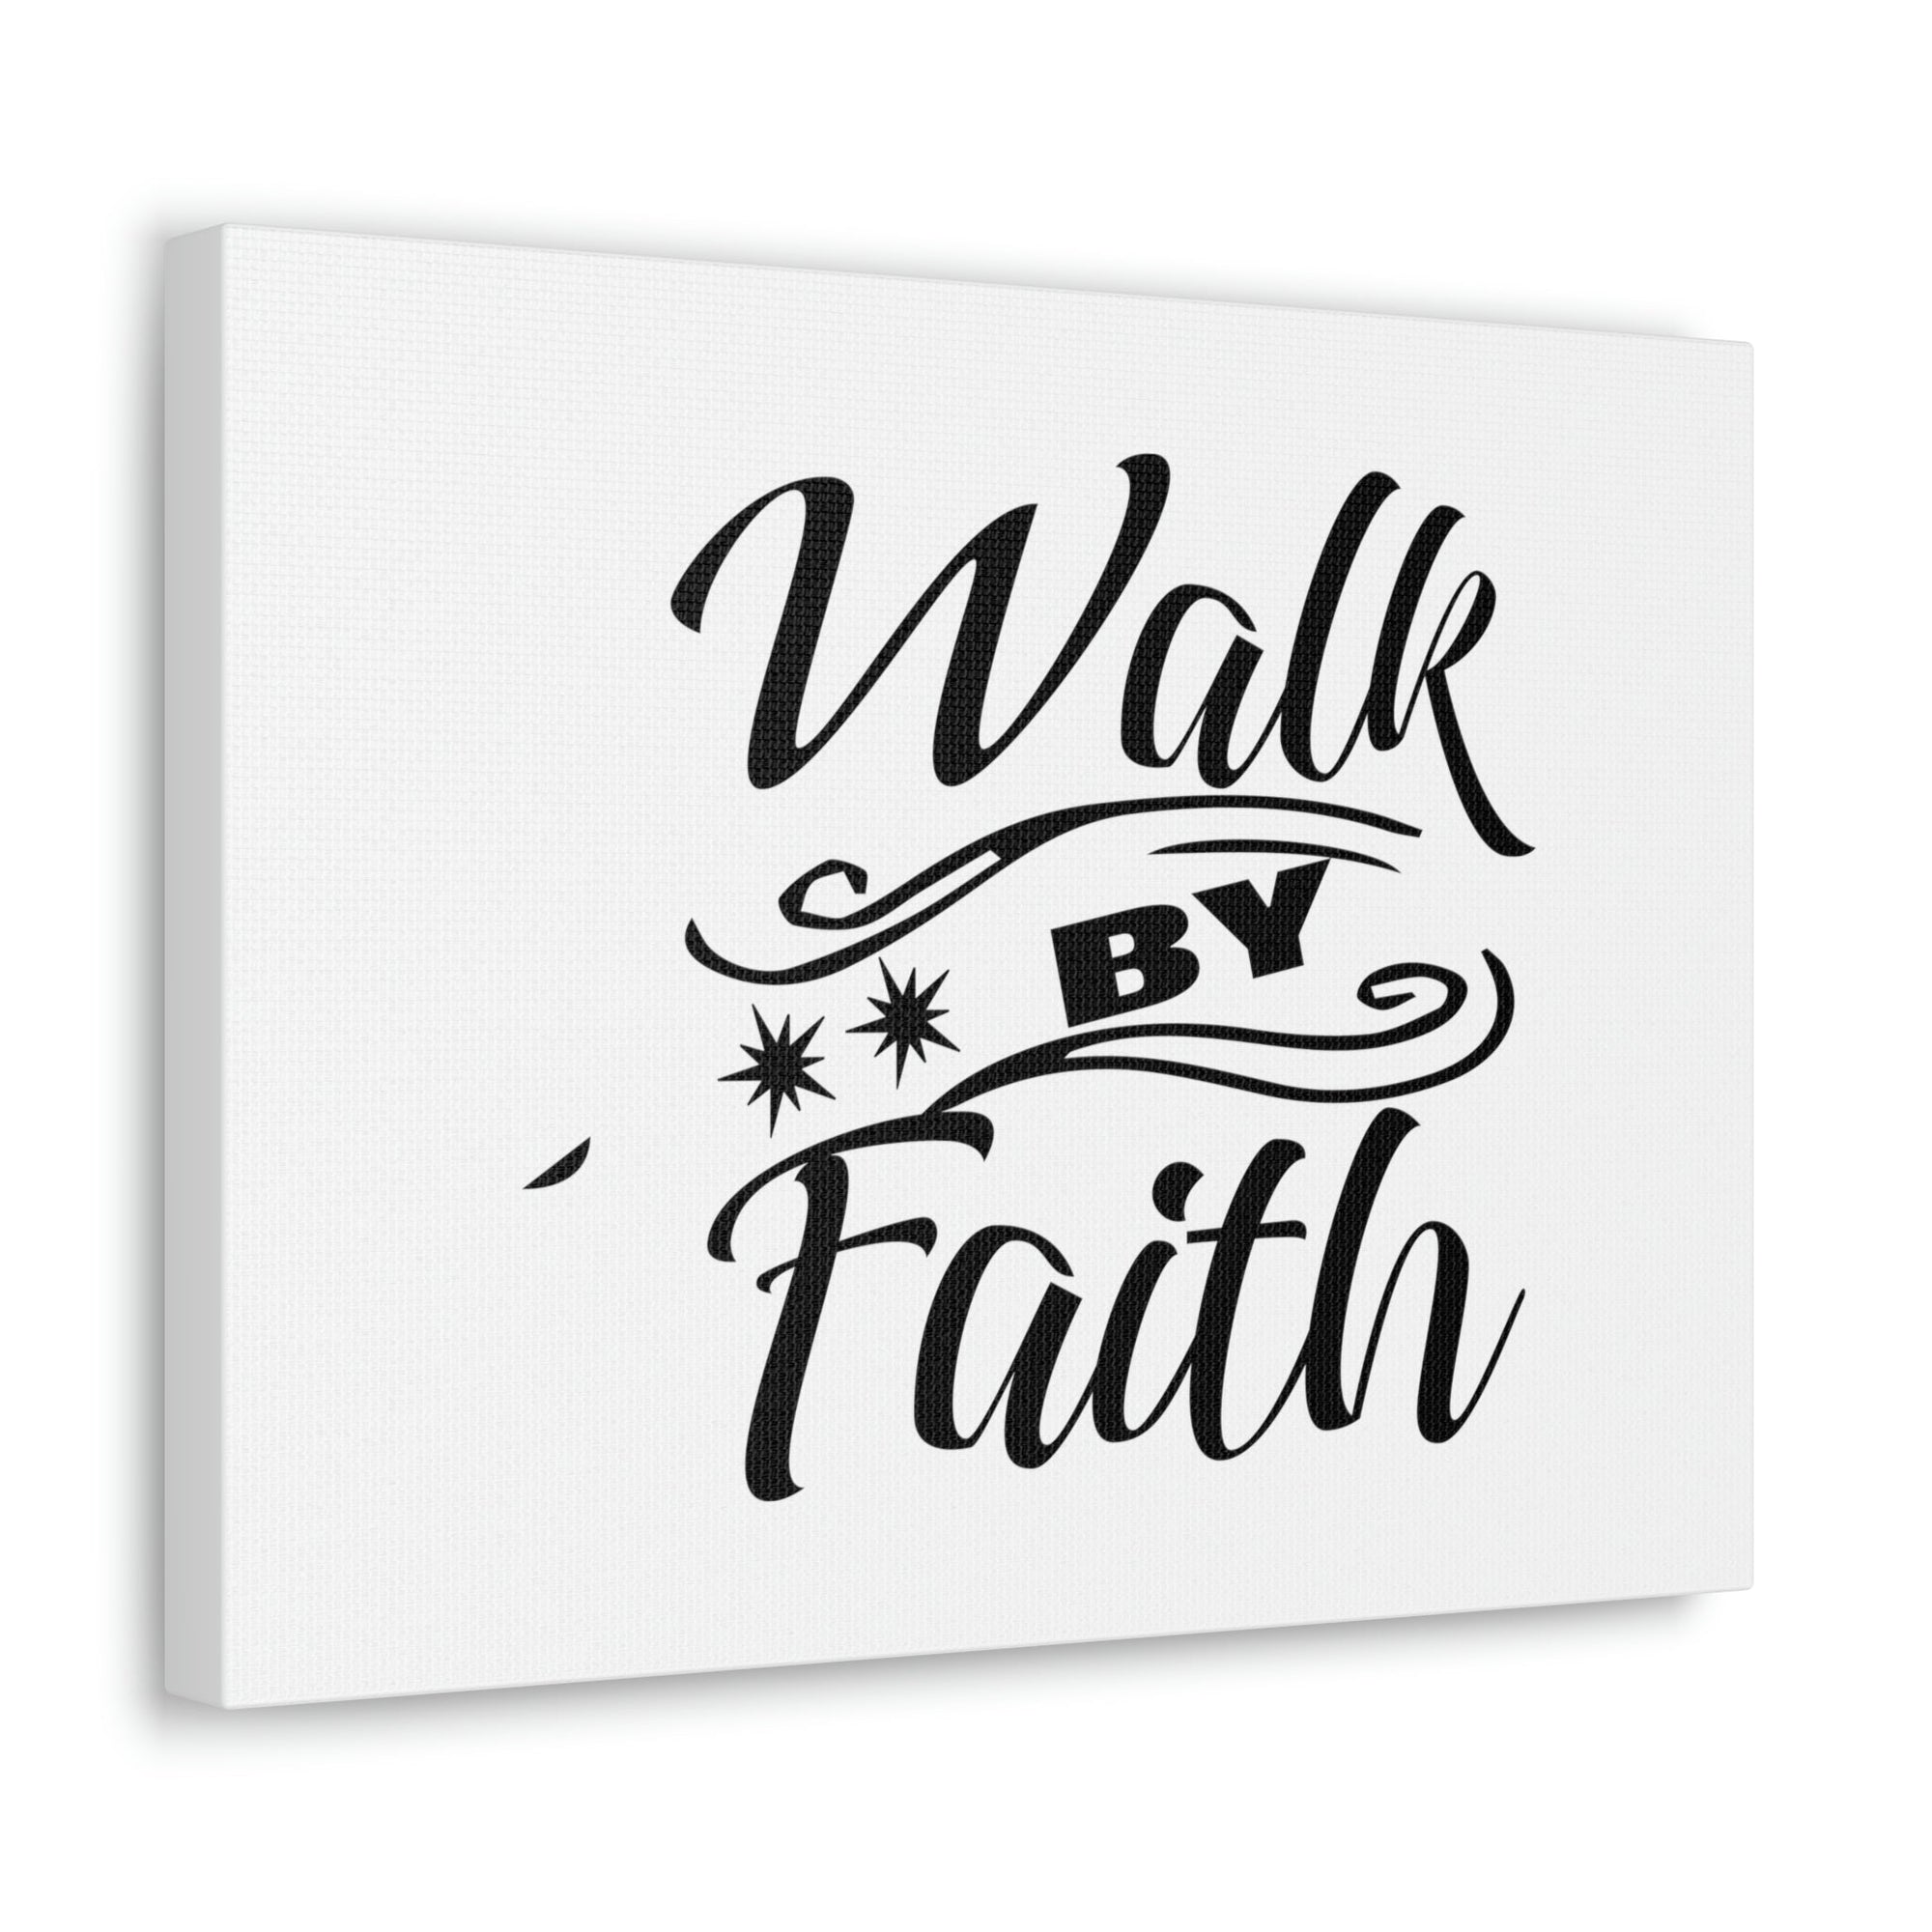 Scripture Walls Walk By Faith 2 Corinthians 5:7 Two Star Christian Wall Art Bible Verse Print Ready to Hang Unframed-Express Your Love Gifts